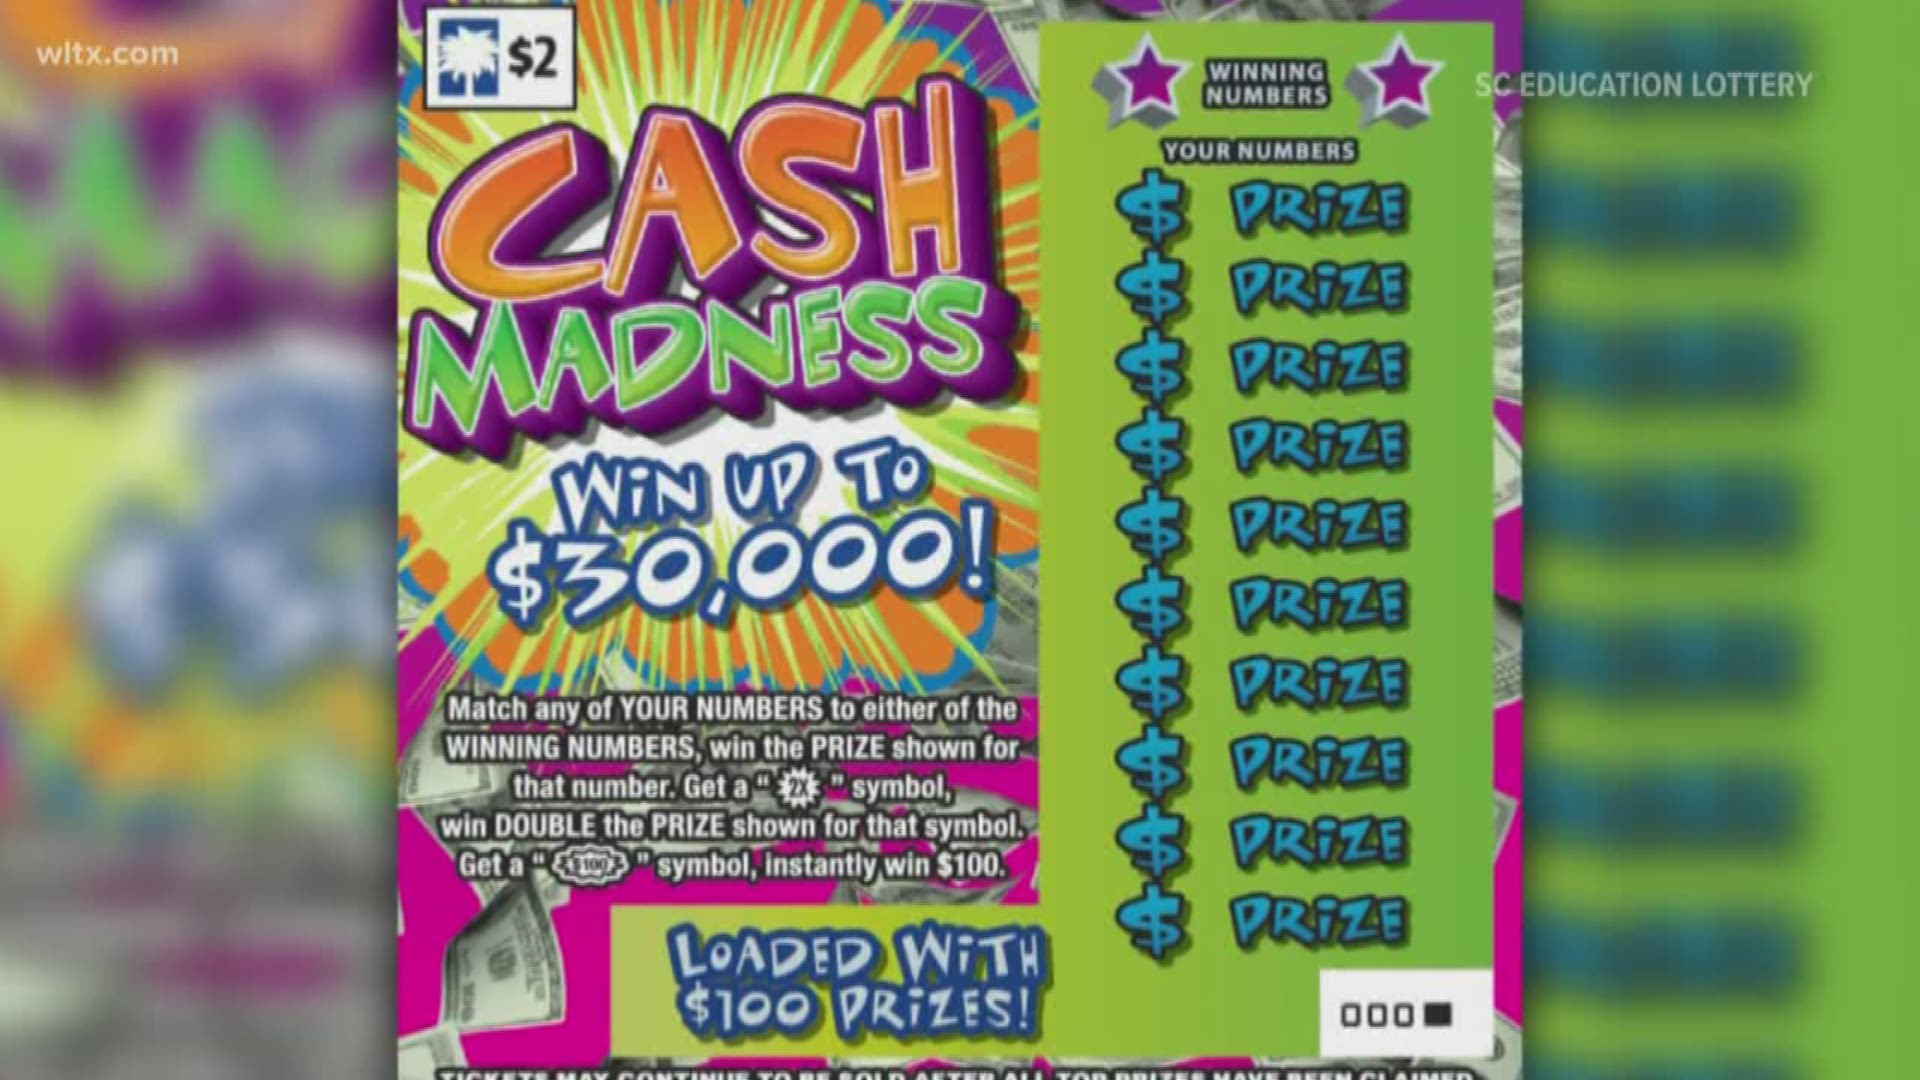 Lottery officials say there were incorrect letters beneath the $1 prize amounts which could cause player confusion.